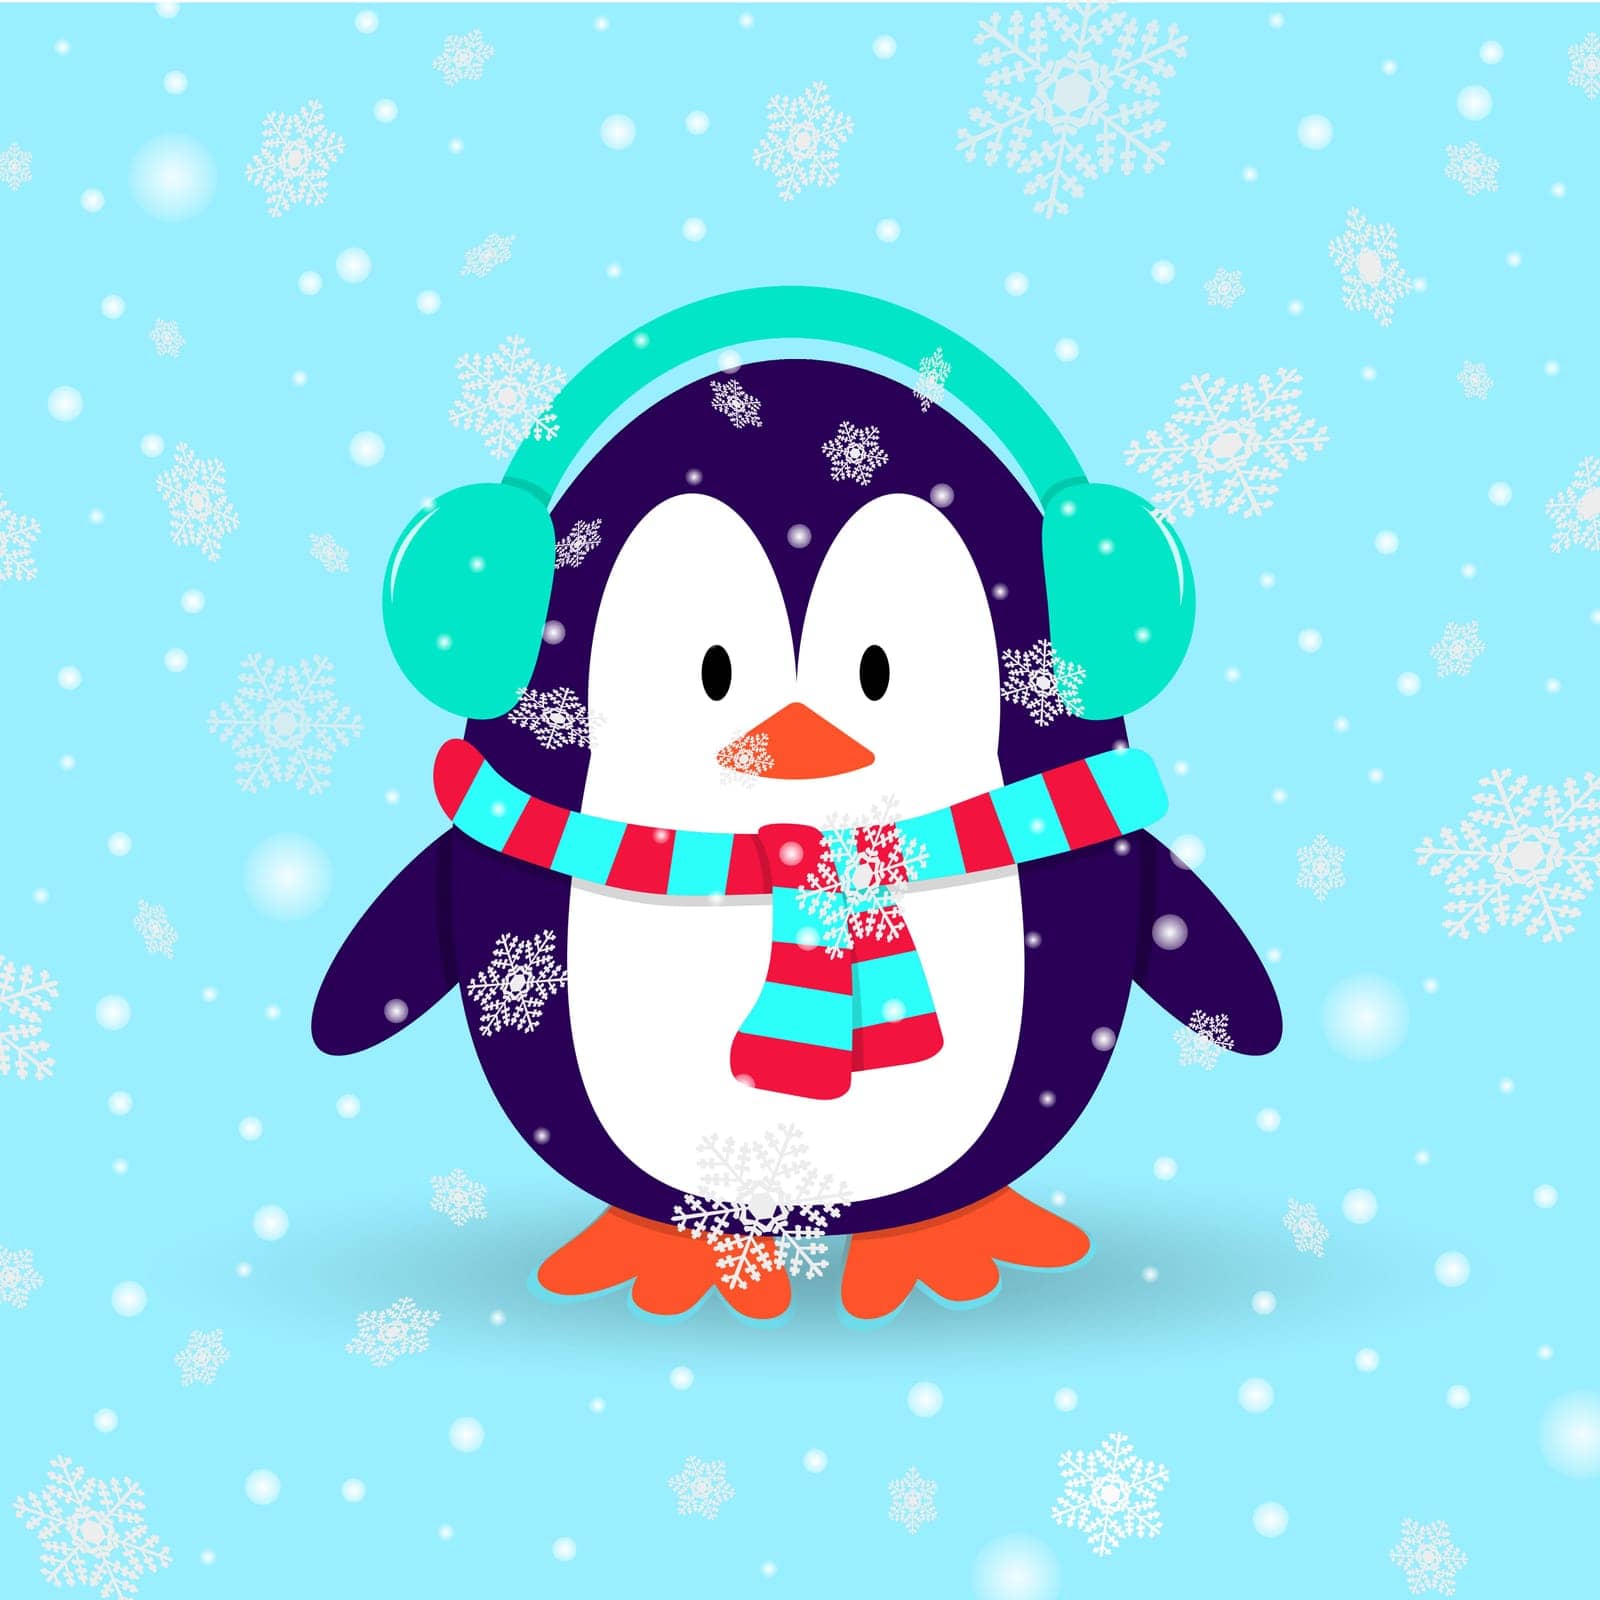 Penguin in wintertime by easycolors